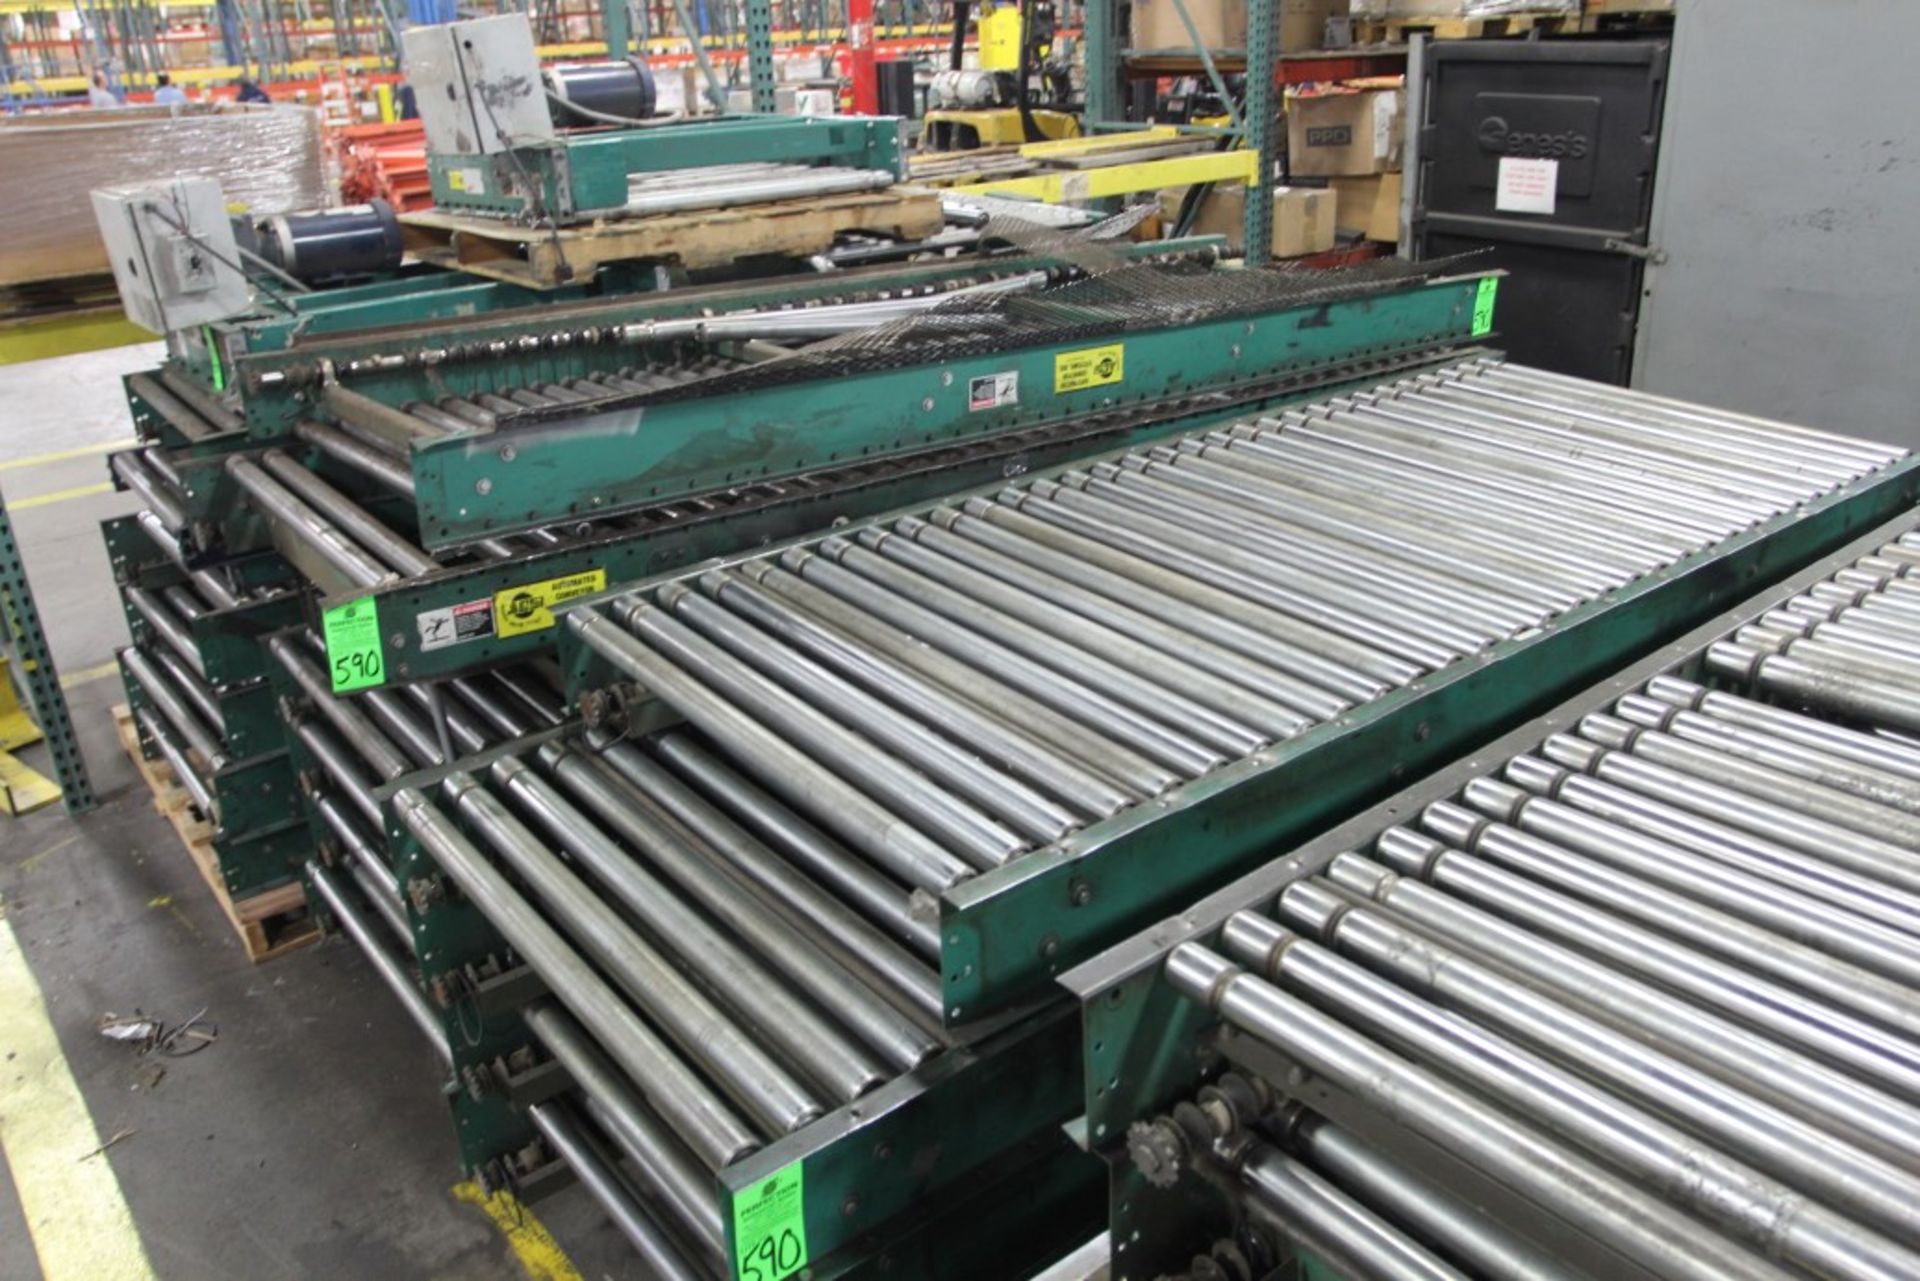 Assembly Line Conveyor System, Comprising 38" Ball Type Conveyor, 38" Roller Conveyor Sections, - Image 4 of 5